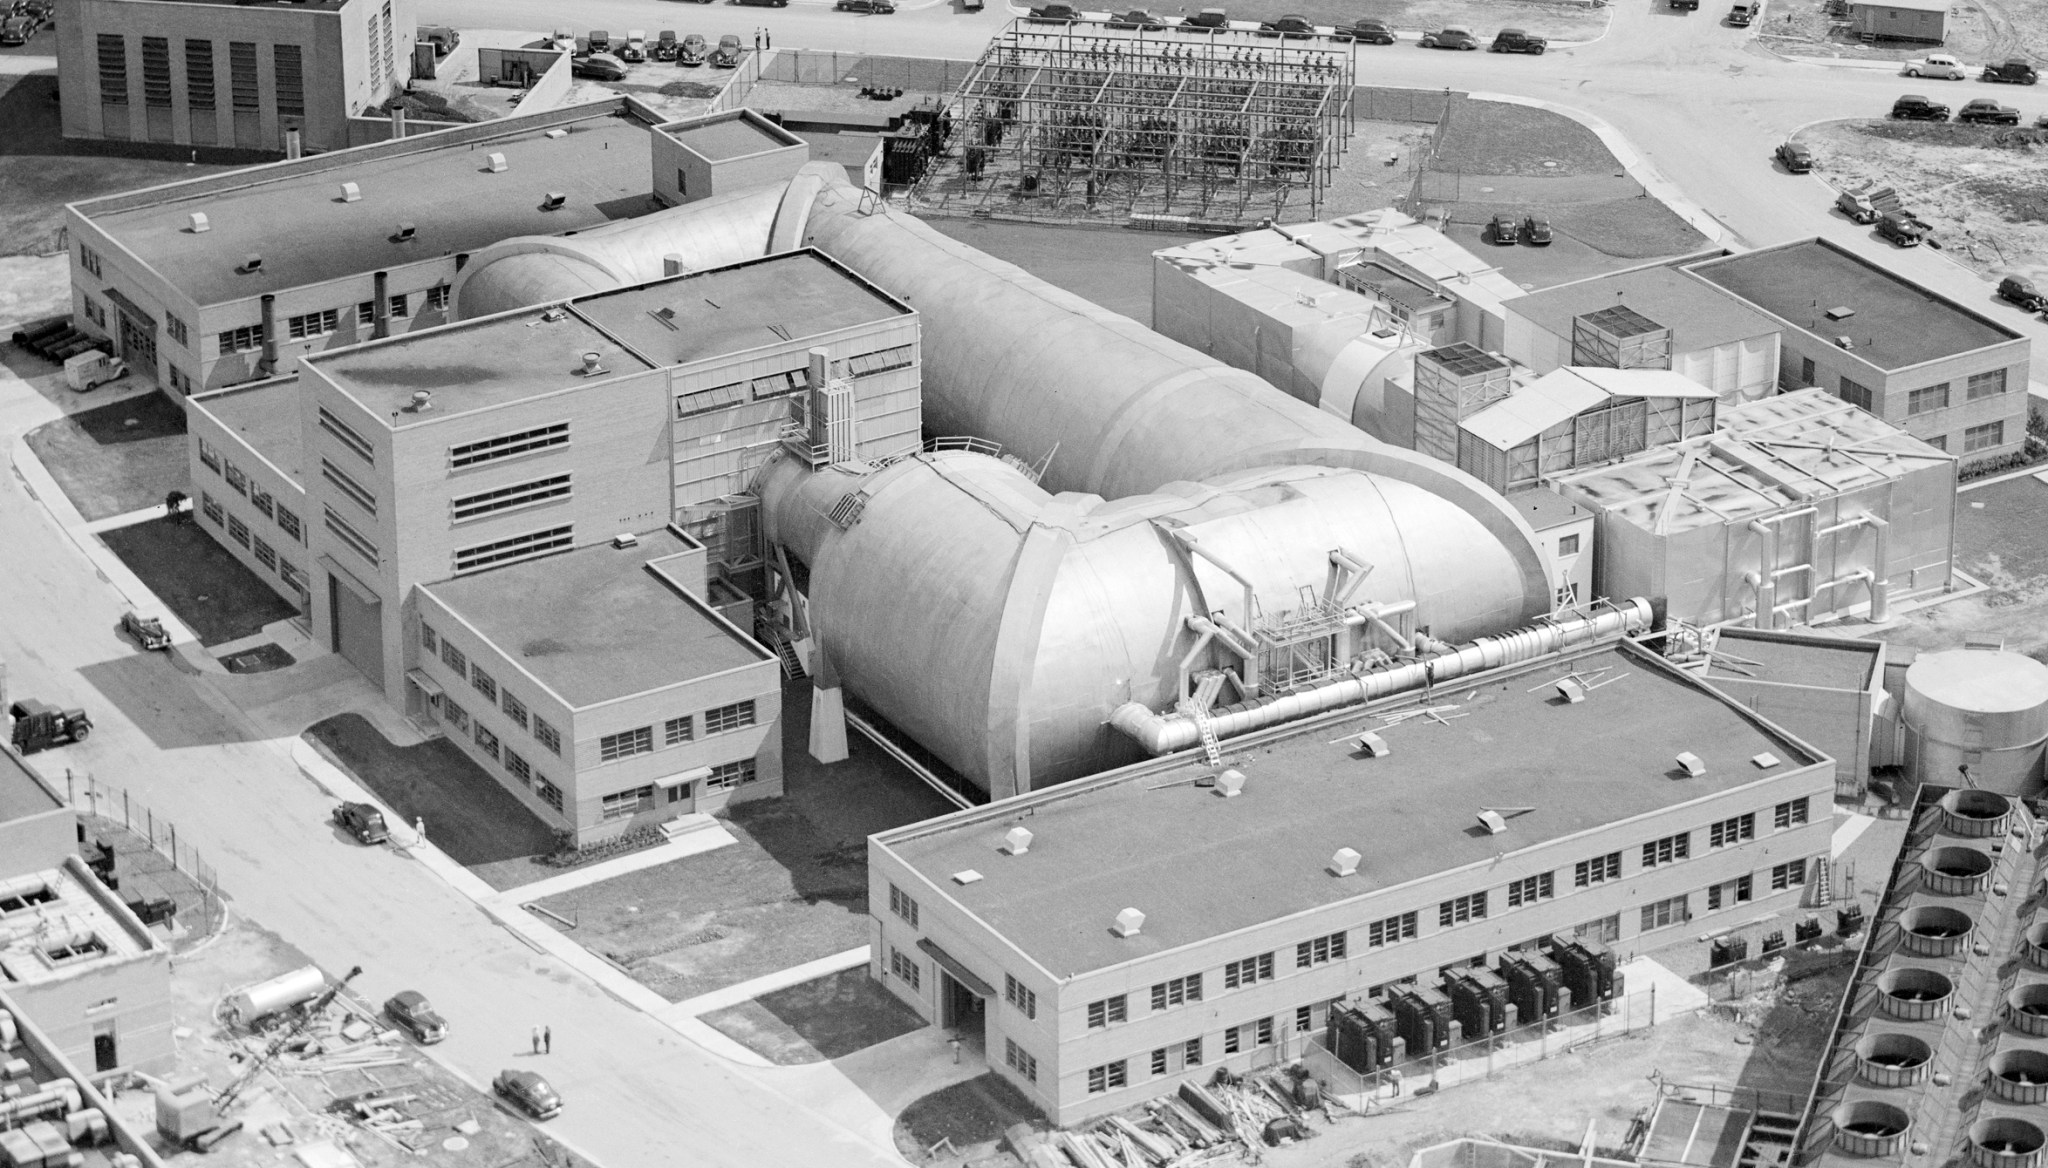 A black-and-white aerial view of a group of buildings at NASA’s Glenn Research Center. A large wind tunnel can be seen at the center of the photo.